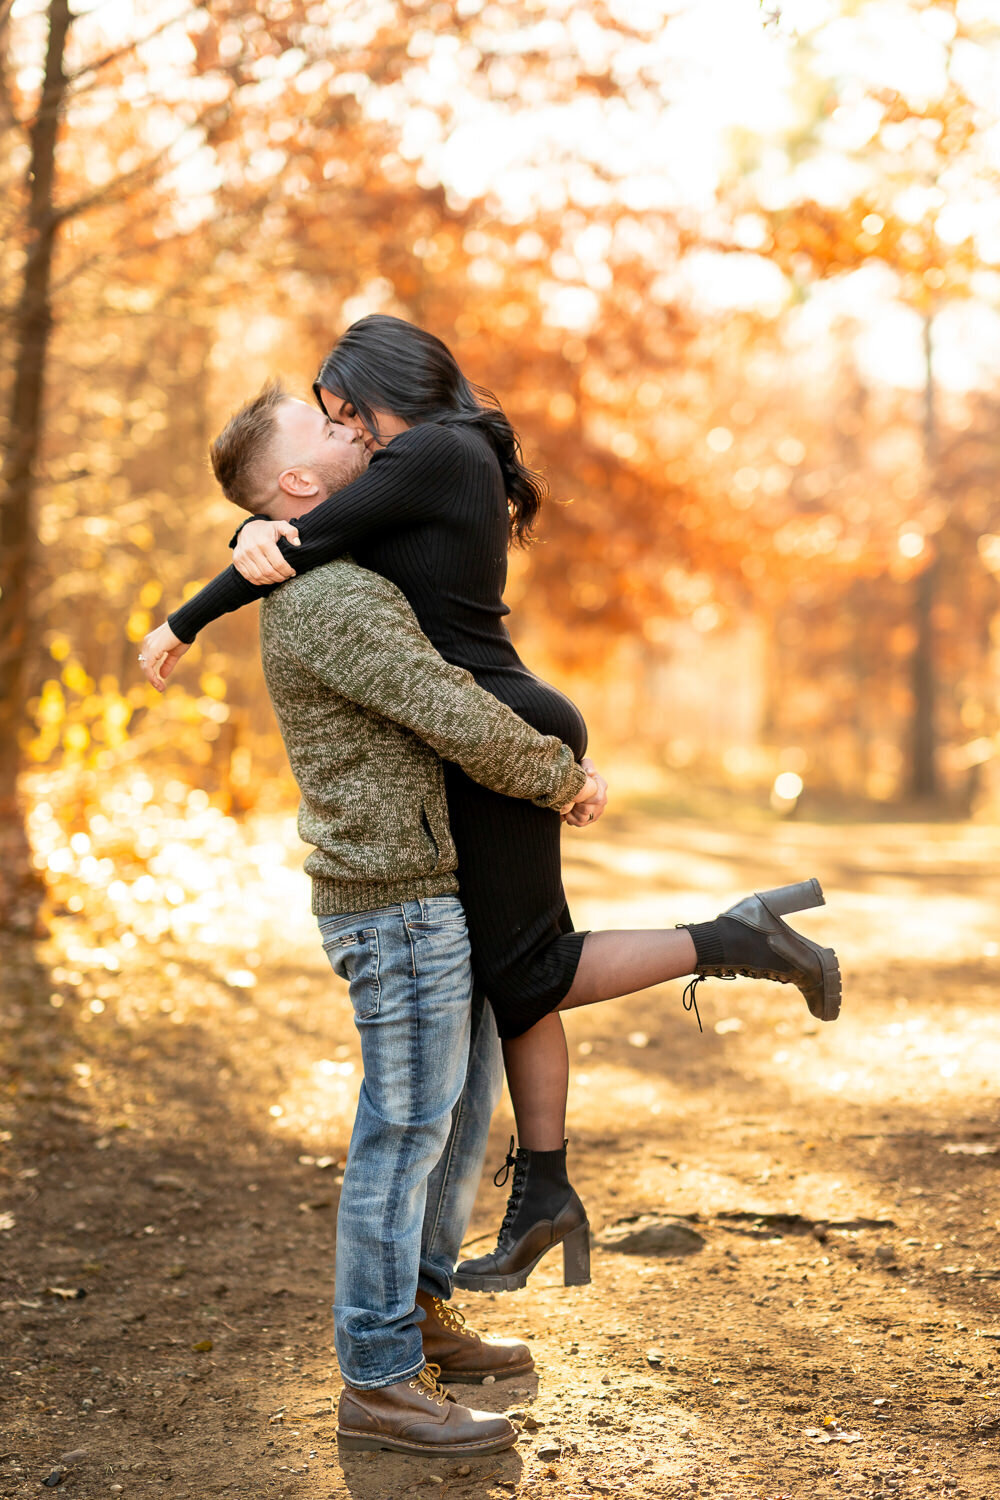 Man lifts and kisses woman in black dress with fall colors in the background.